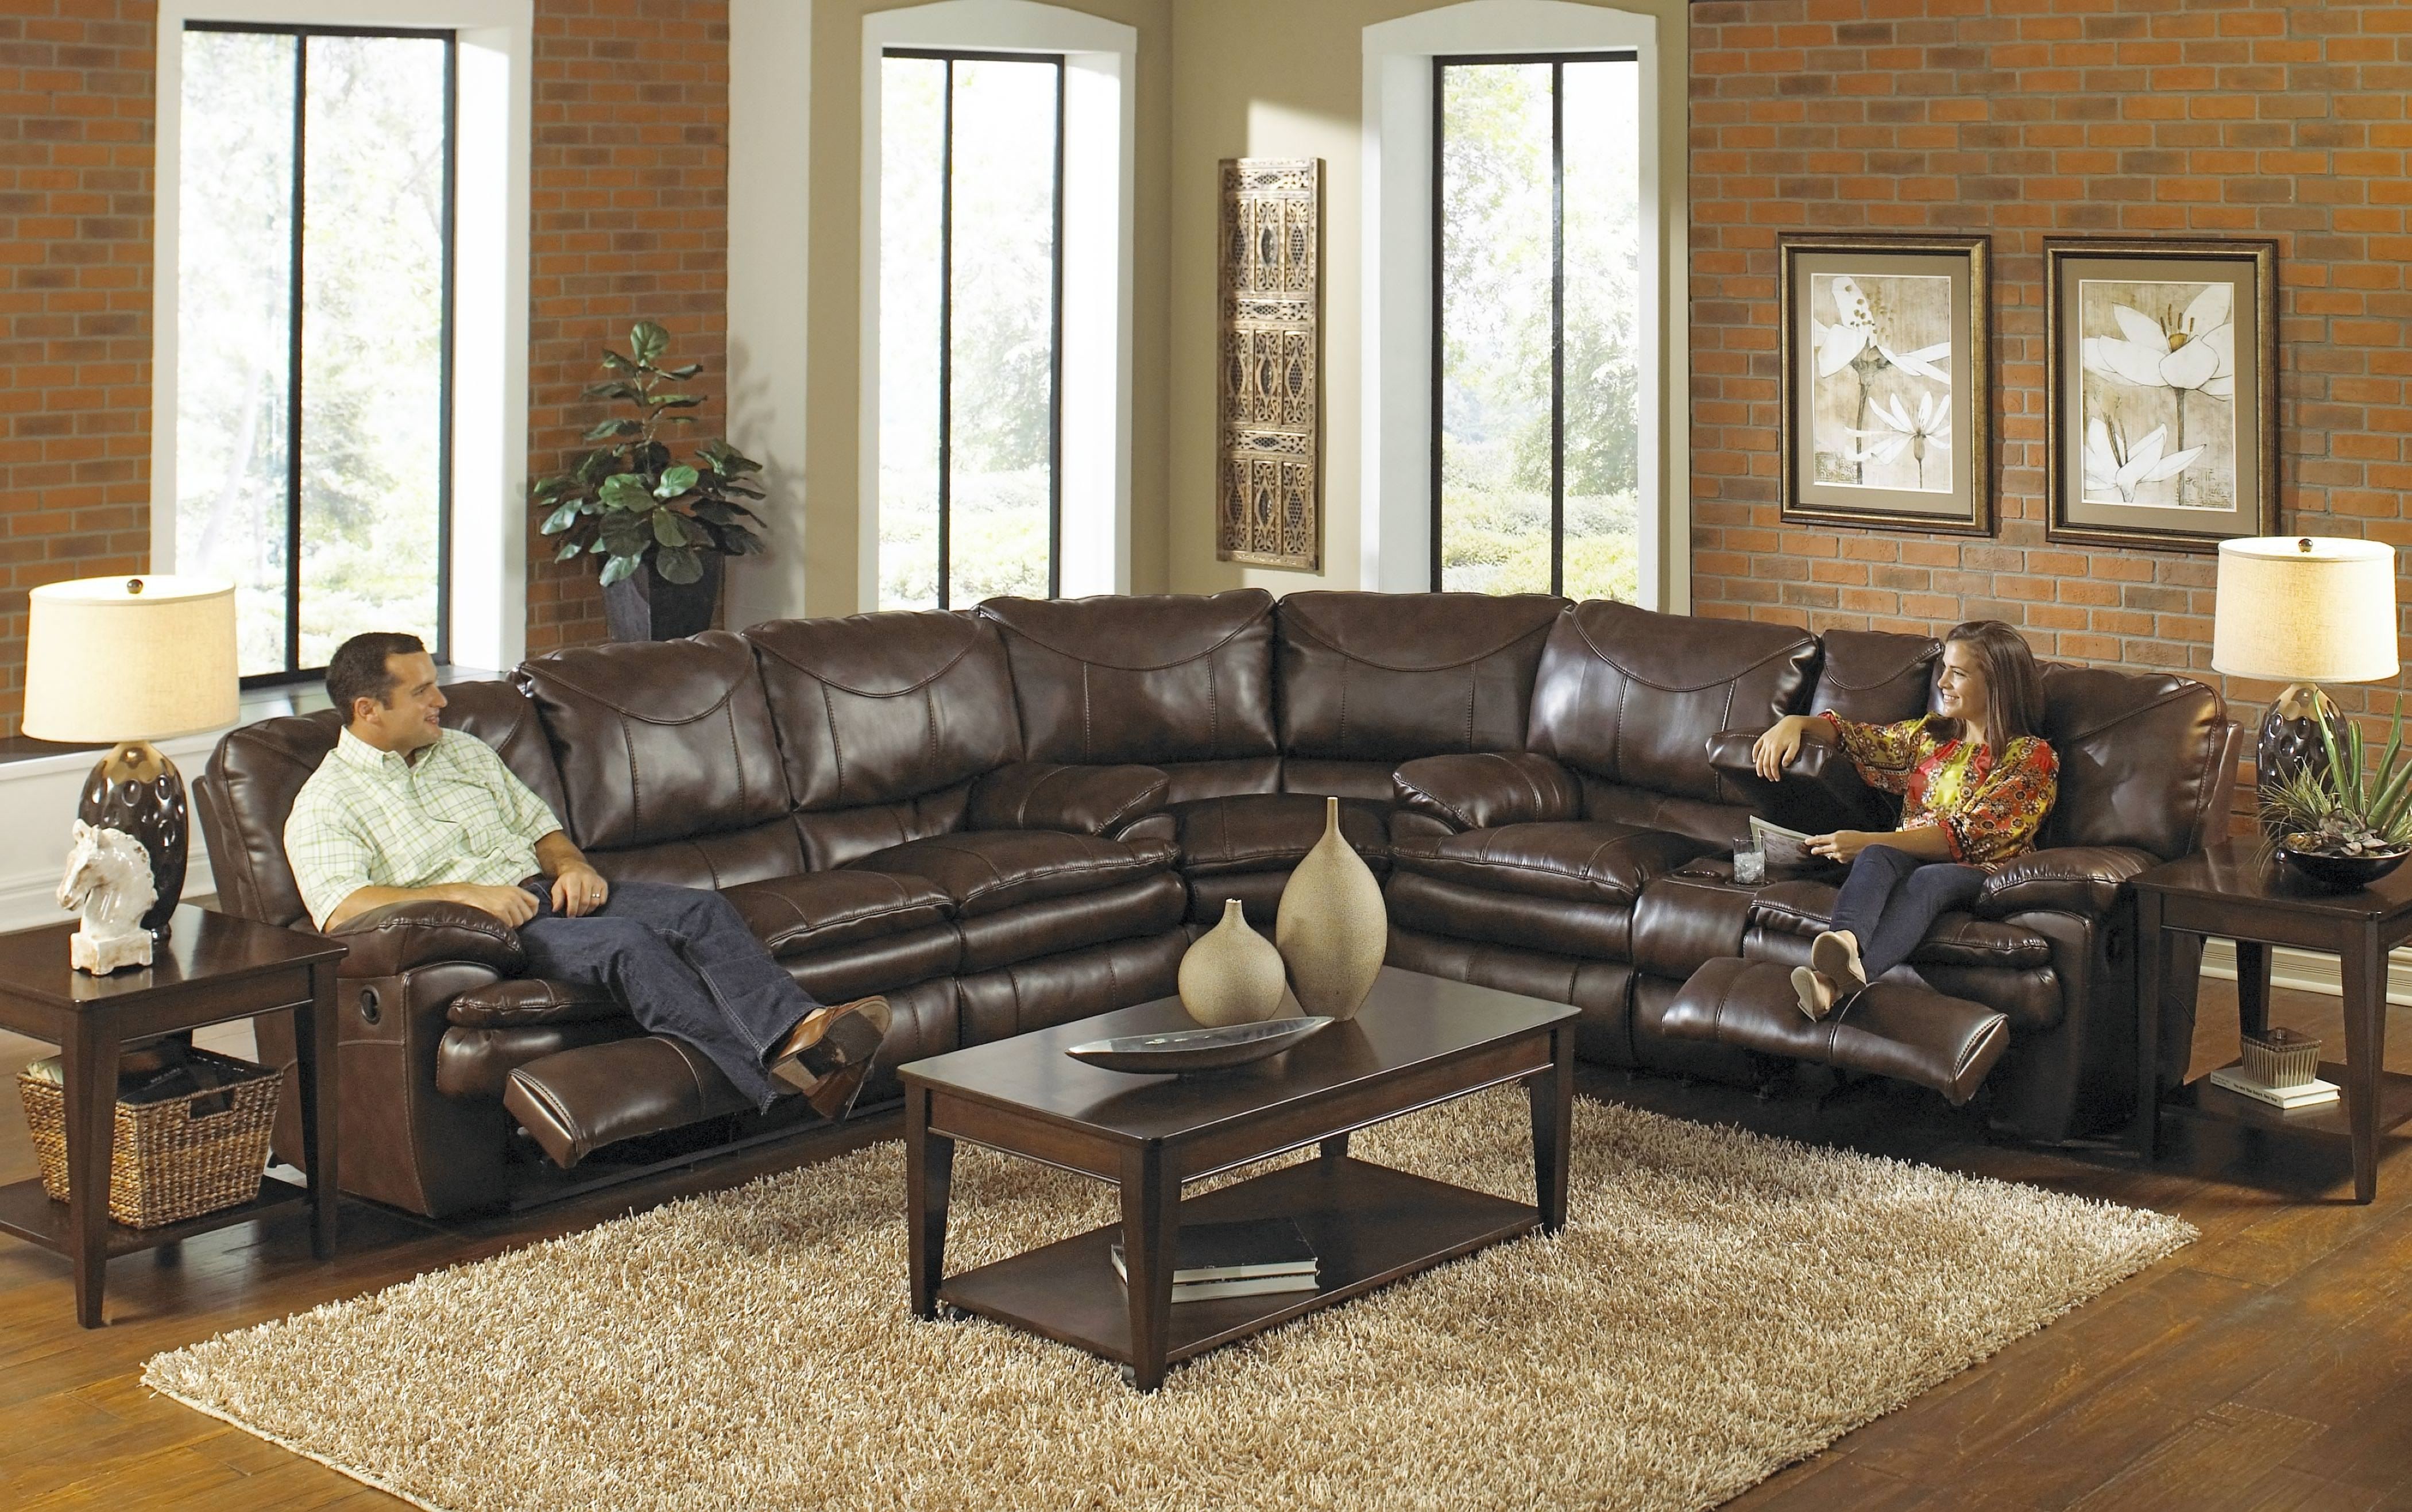 Sectional Sofa Design: Recliner Sectional Sofas Microfiber Clearance Intended For Leather Recliner Sectional Sofas (Photo 3 of 10)